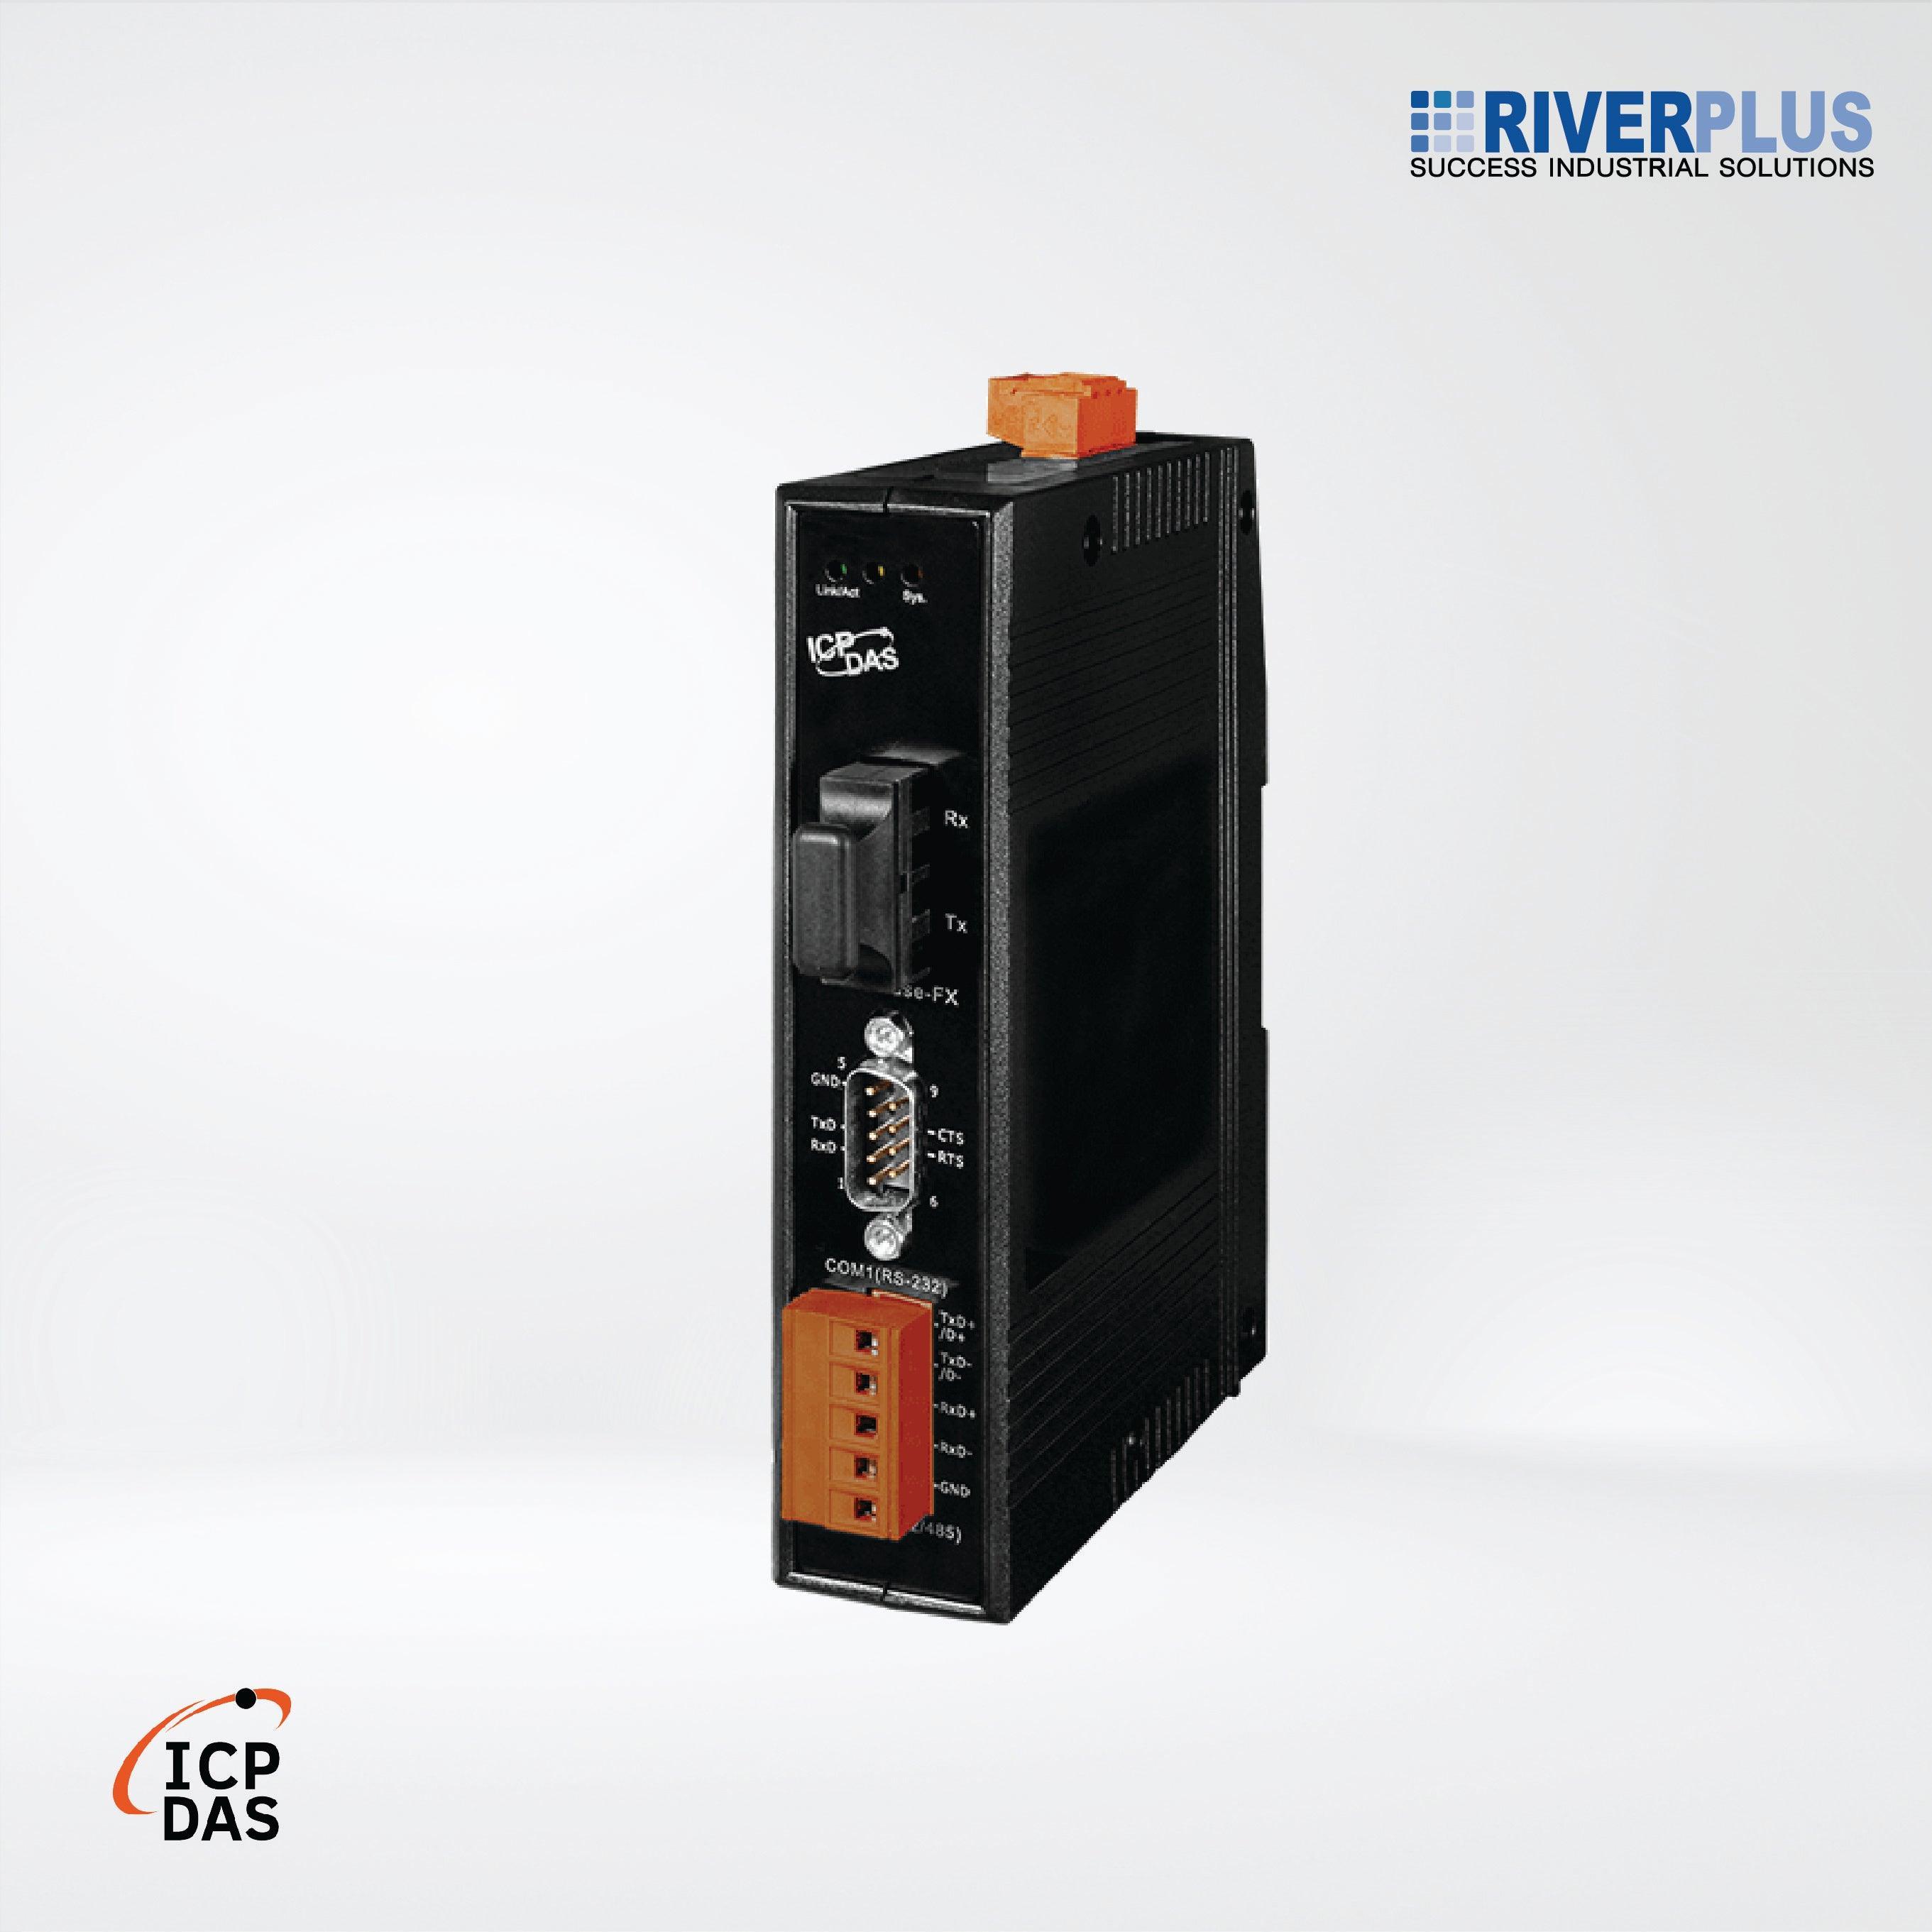 PDS-220FC Programmable (1x RS-232 and 1x RS-422/485) Serial-to-Fiber Device Server - Riverplus